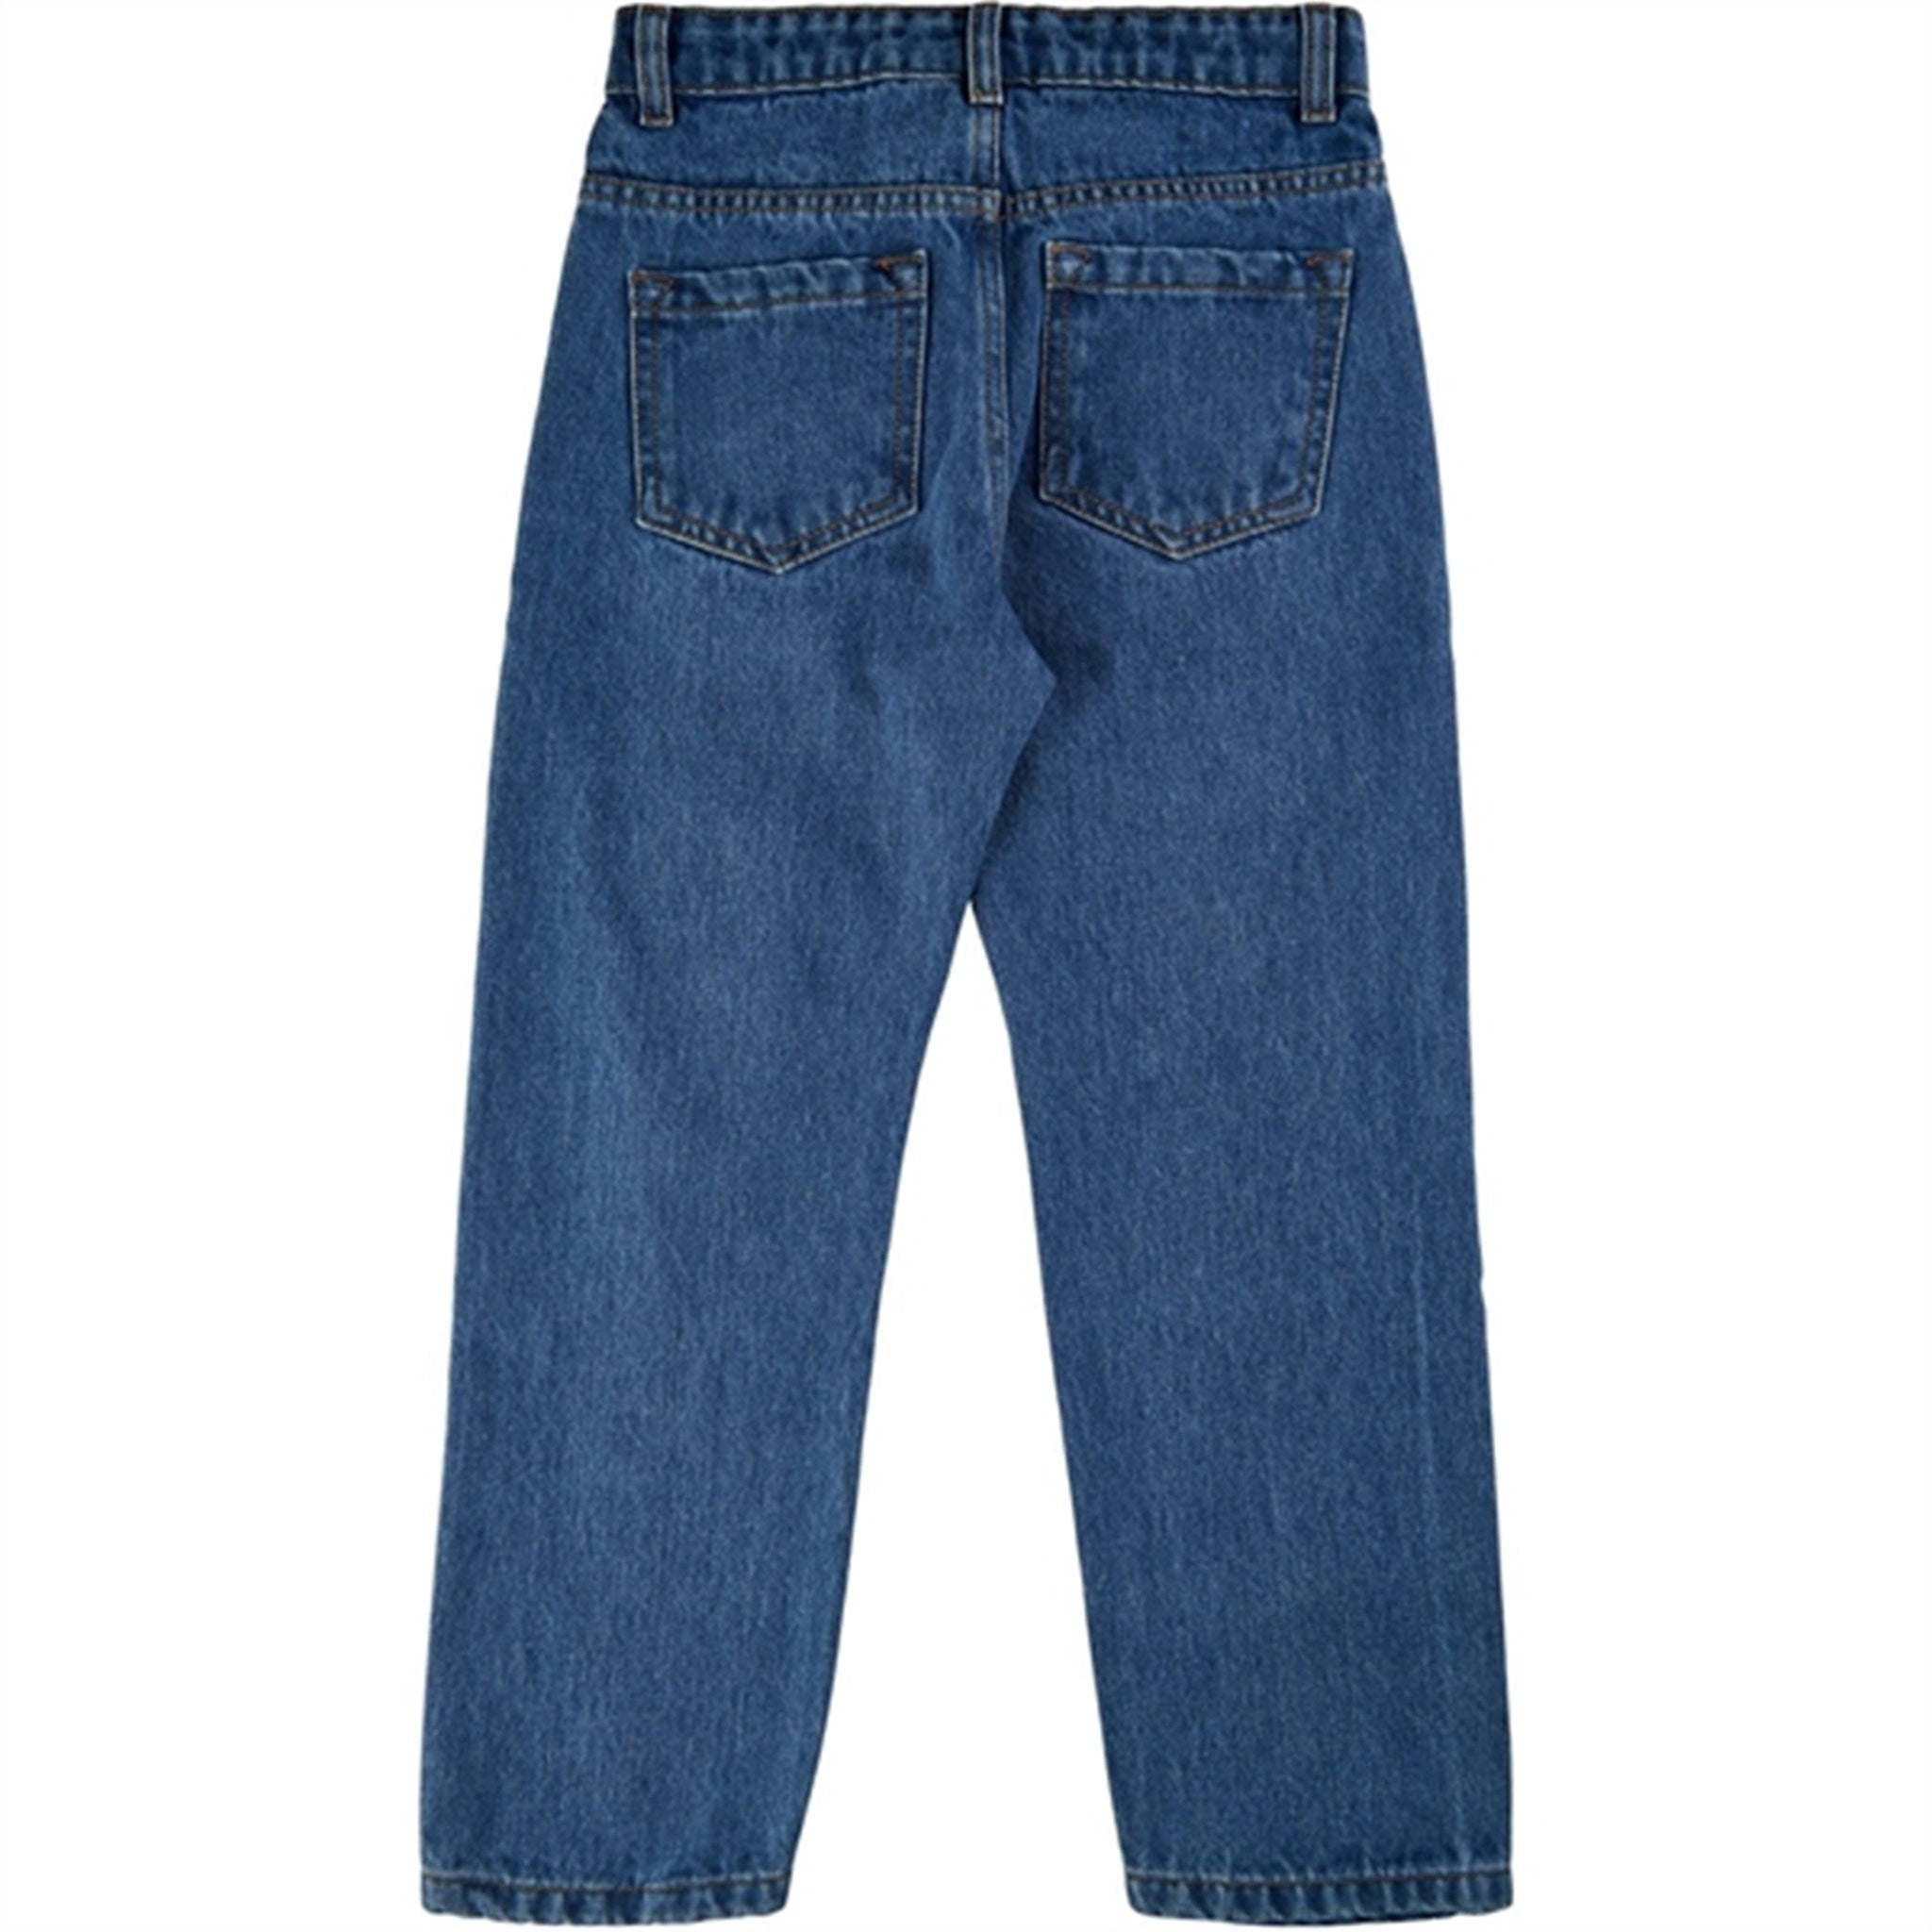 THE NEW Blue Denim Frede Loose Fit Jeans 4